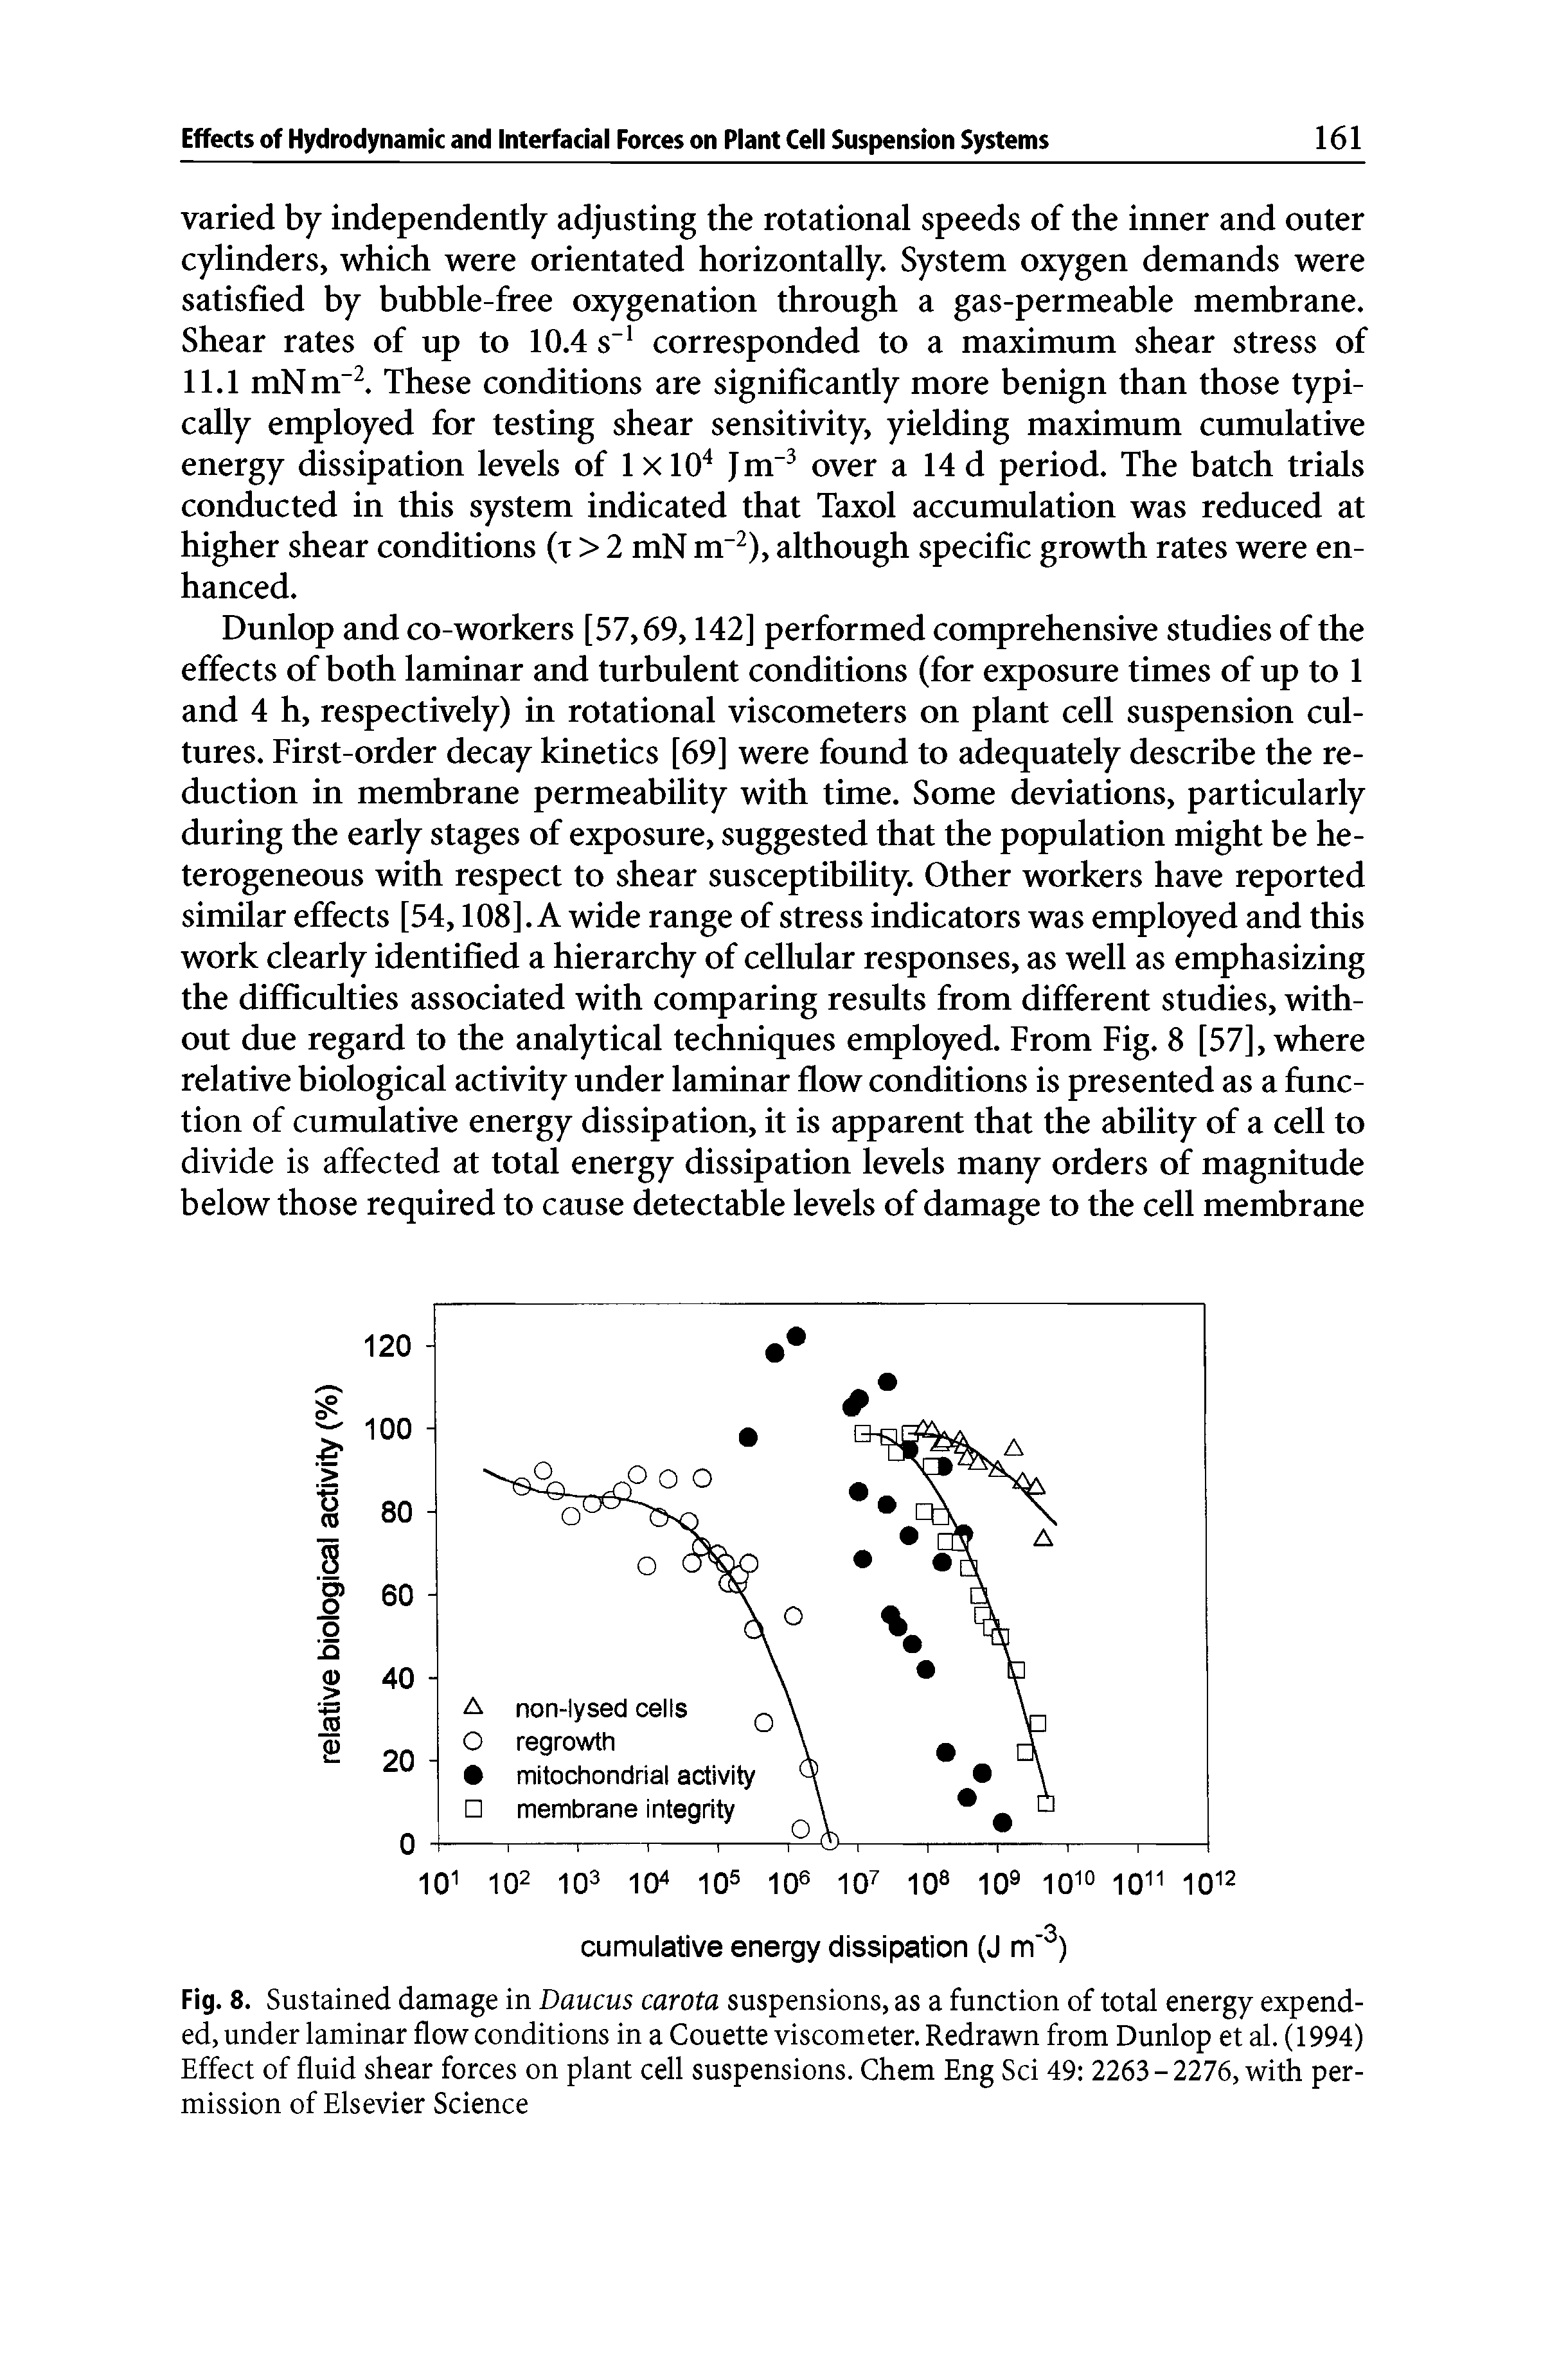 Fig. 8. Sustained damage in Daucus carota suspensions, as a function of total energy expended, under laminar flow conditions in a Couette viscometer. Redrawn from Dunlop et al. (1994) Effect of fluid shear forces on plant cell suspensions. Chem Eng Sci 49 2263 - 2276, with permission of Elsevier Science...